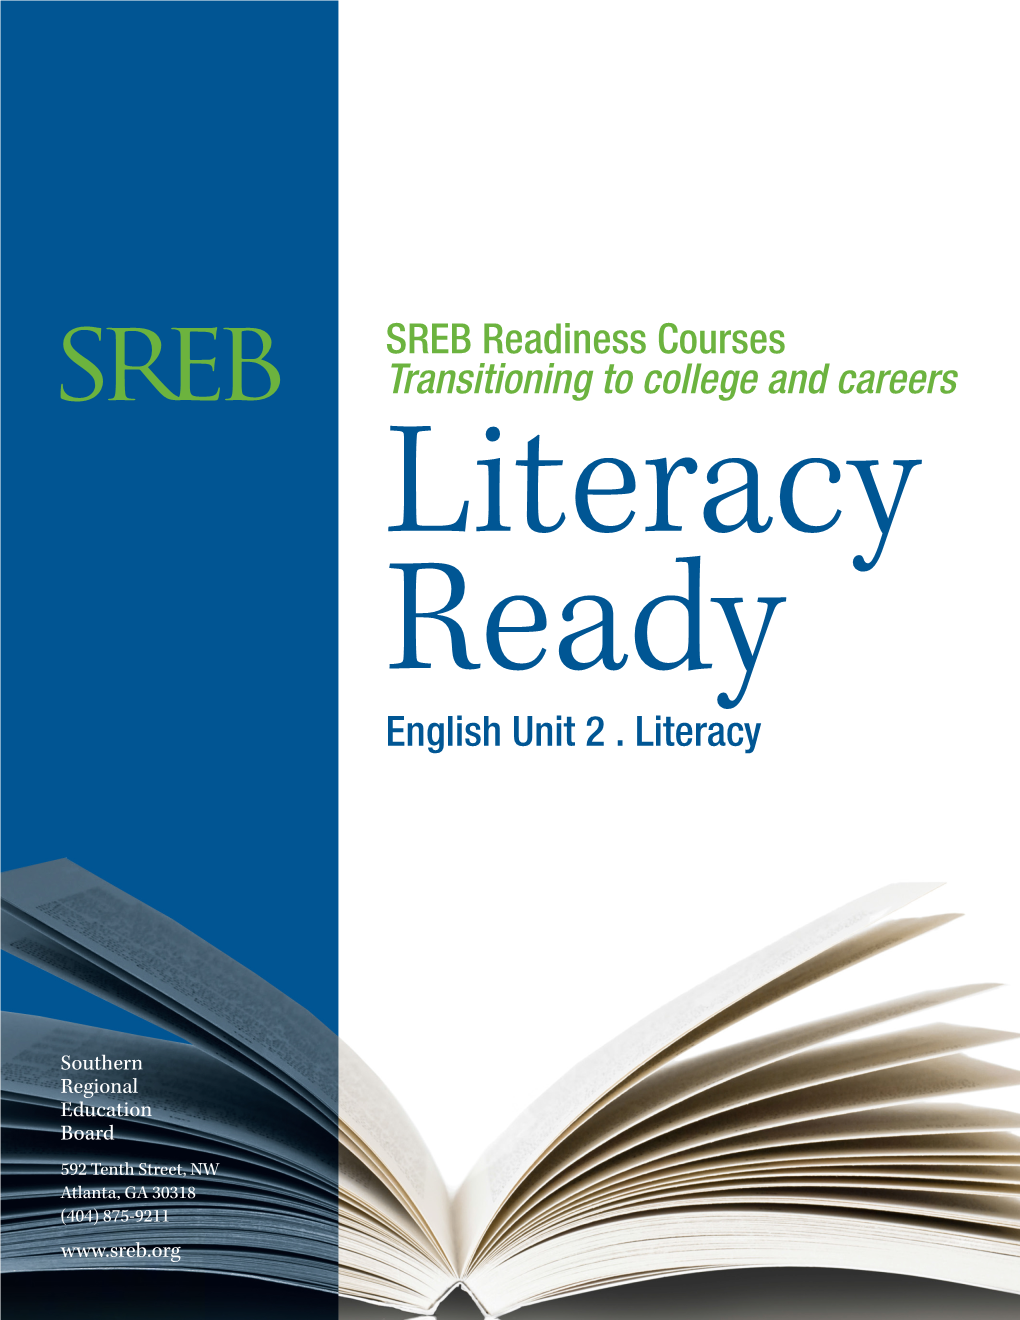 SREB Readiness Courses Transitioning to College and Careers Literacy Ready English Unit 2